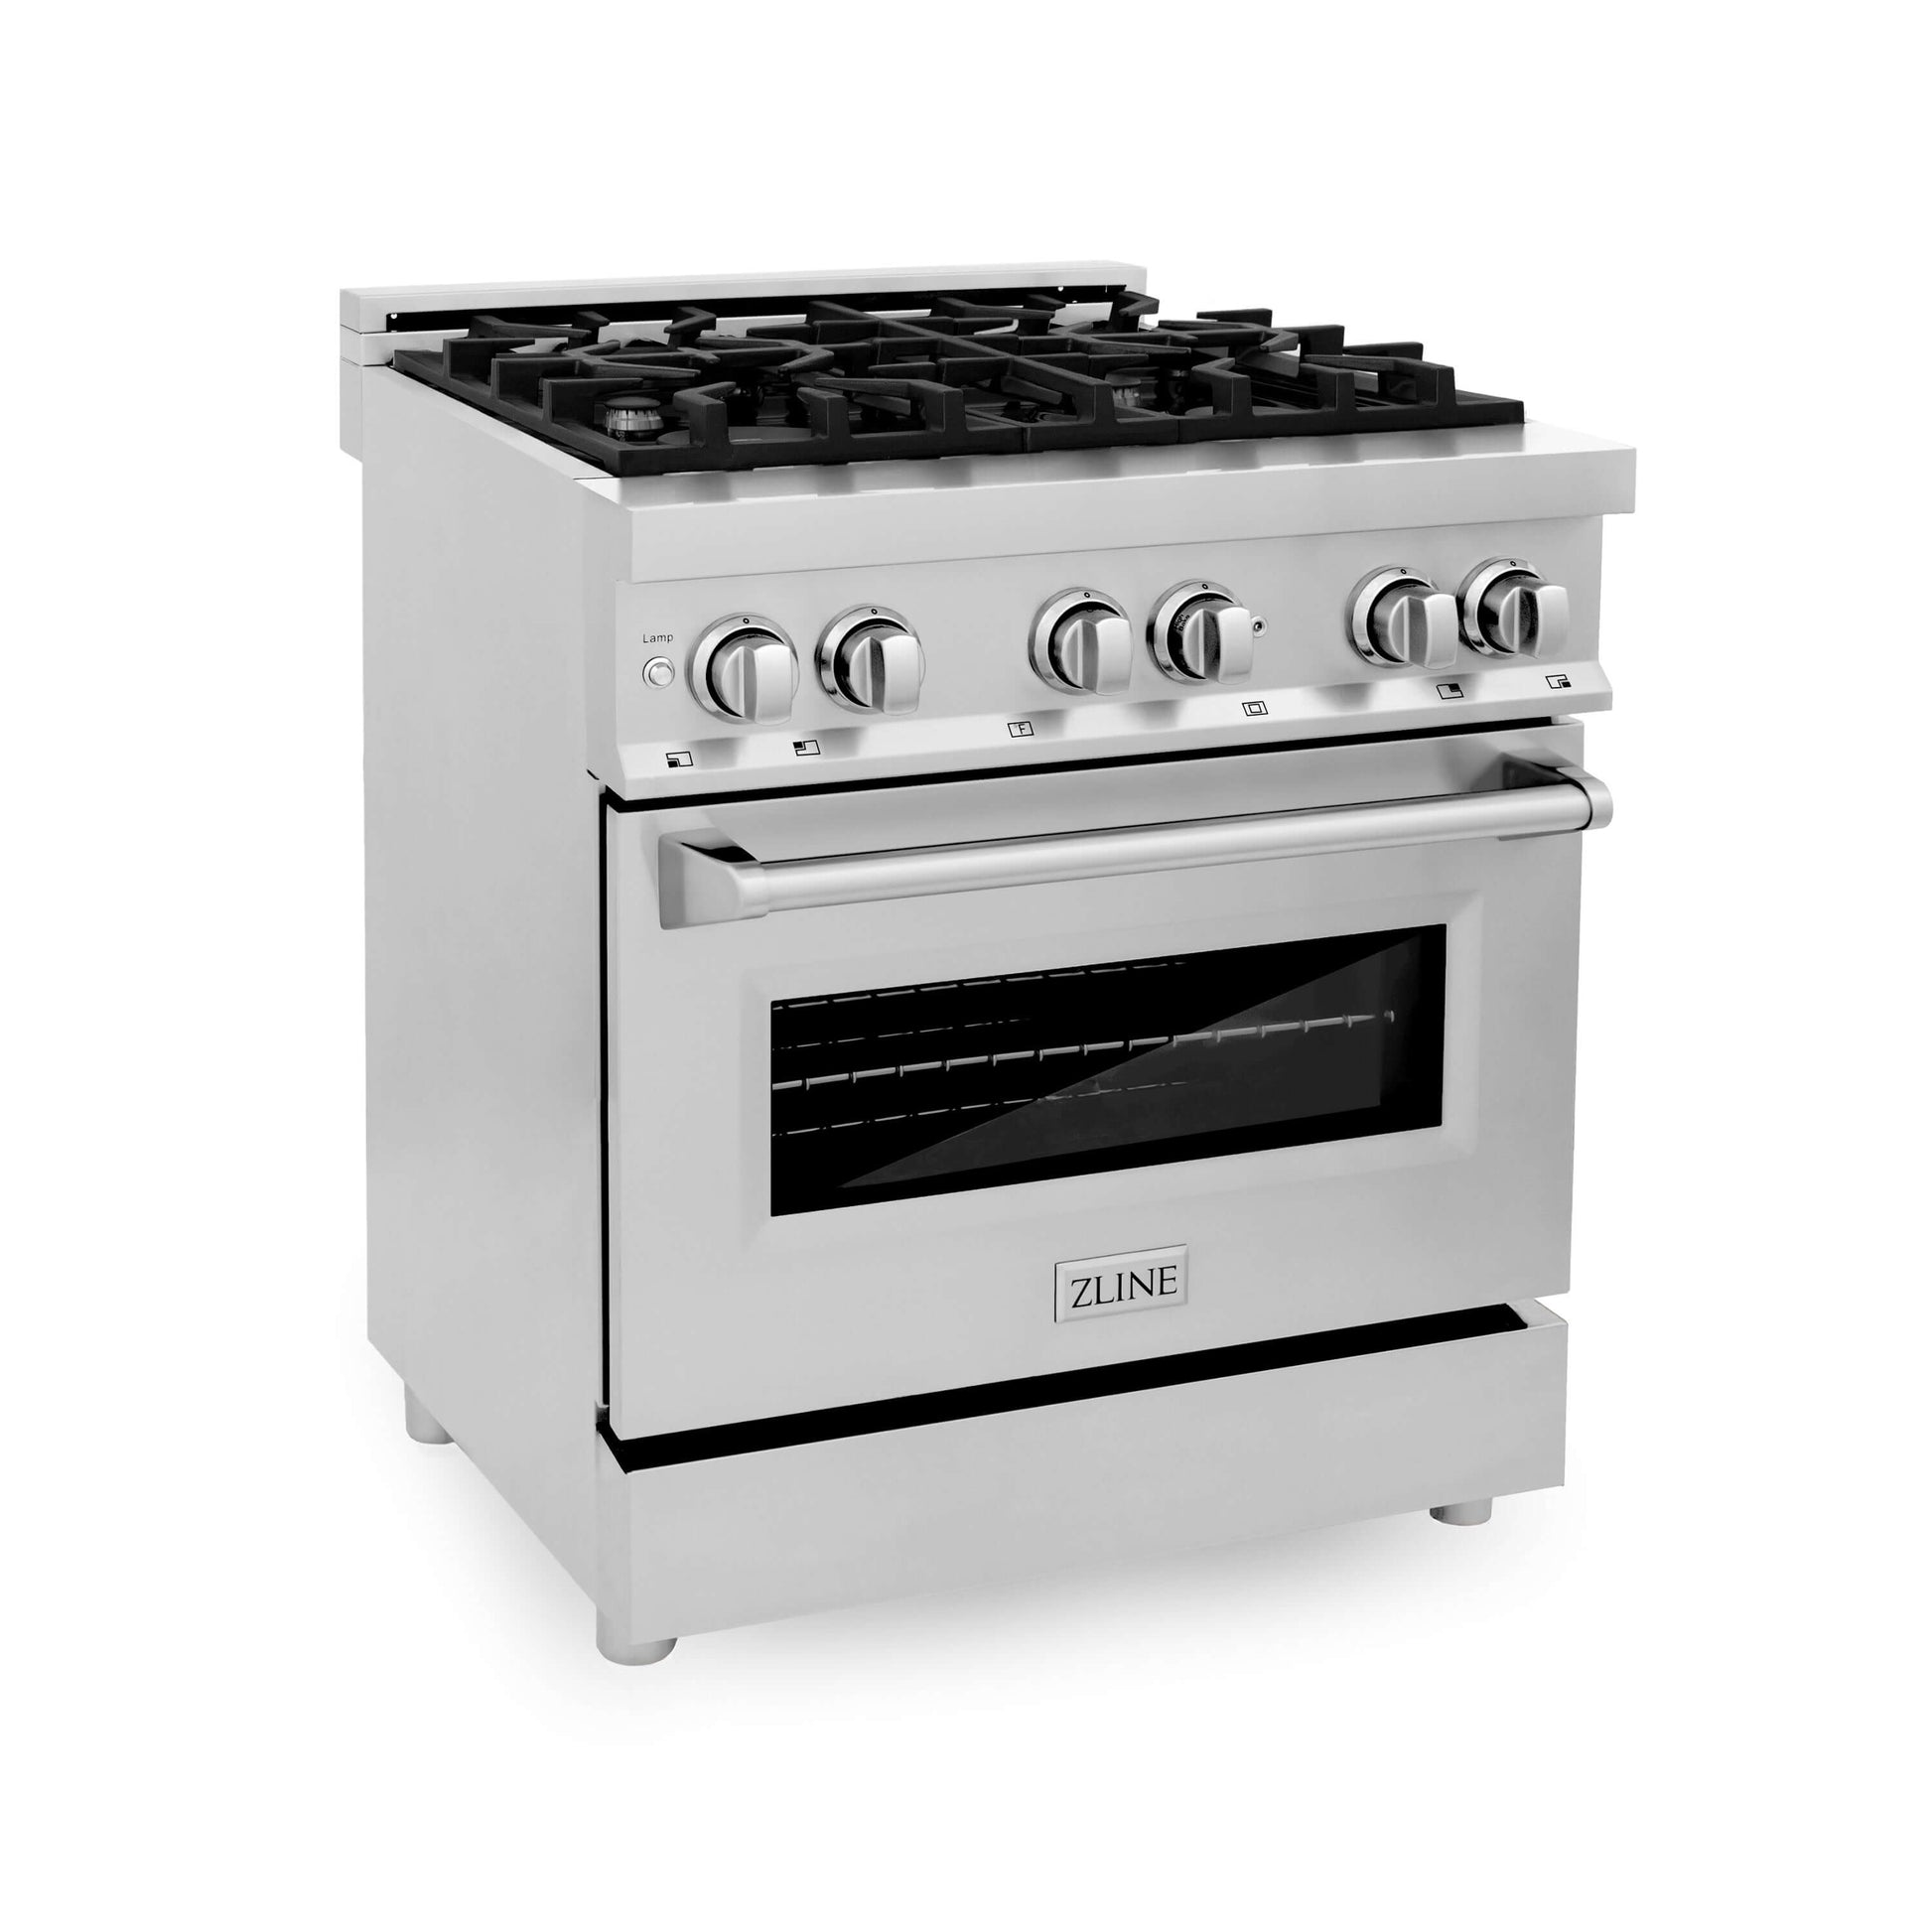 ZLINE 30 in. 4.0 cu. ft. Dual Fuel Range with Gas Stove and Electric Oven in Stainless Steel (RA30) side, oven closed.